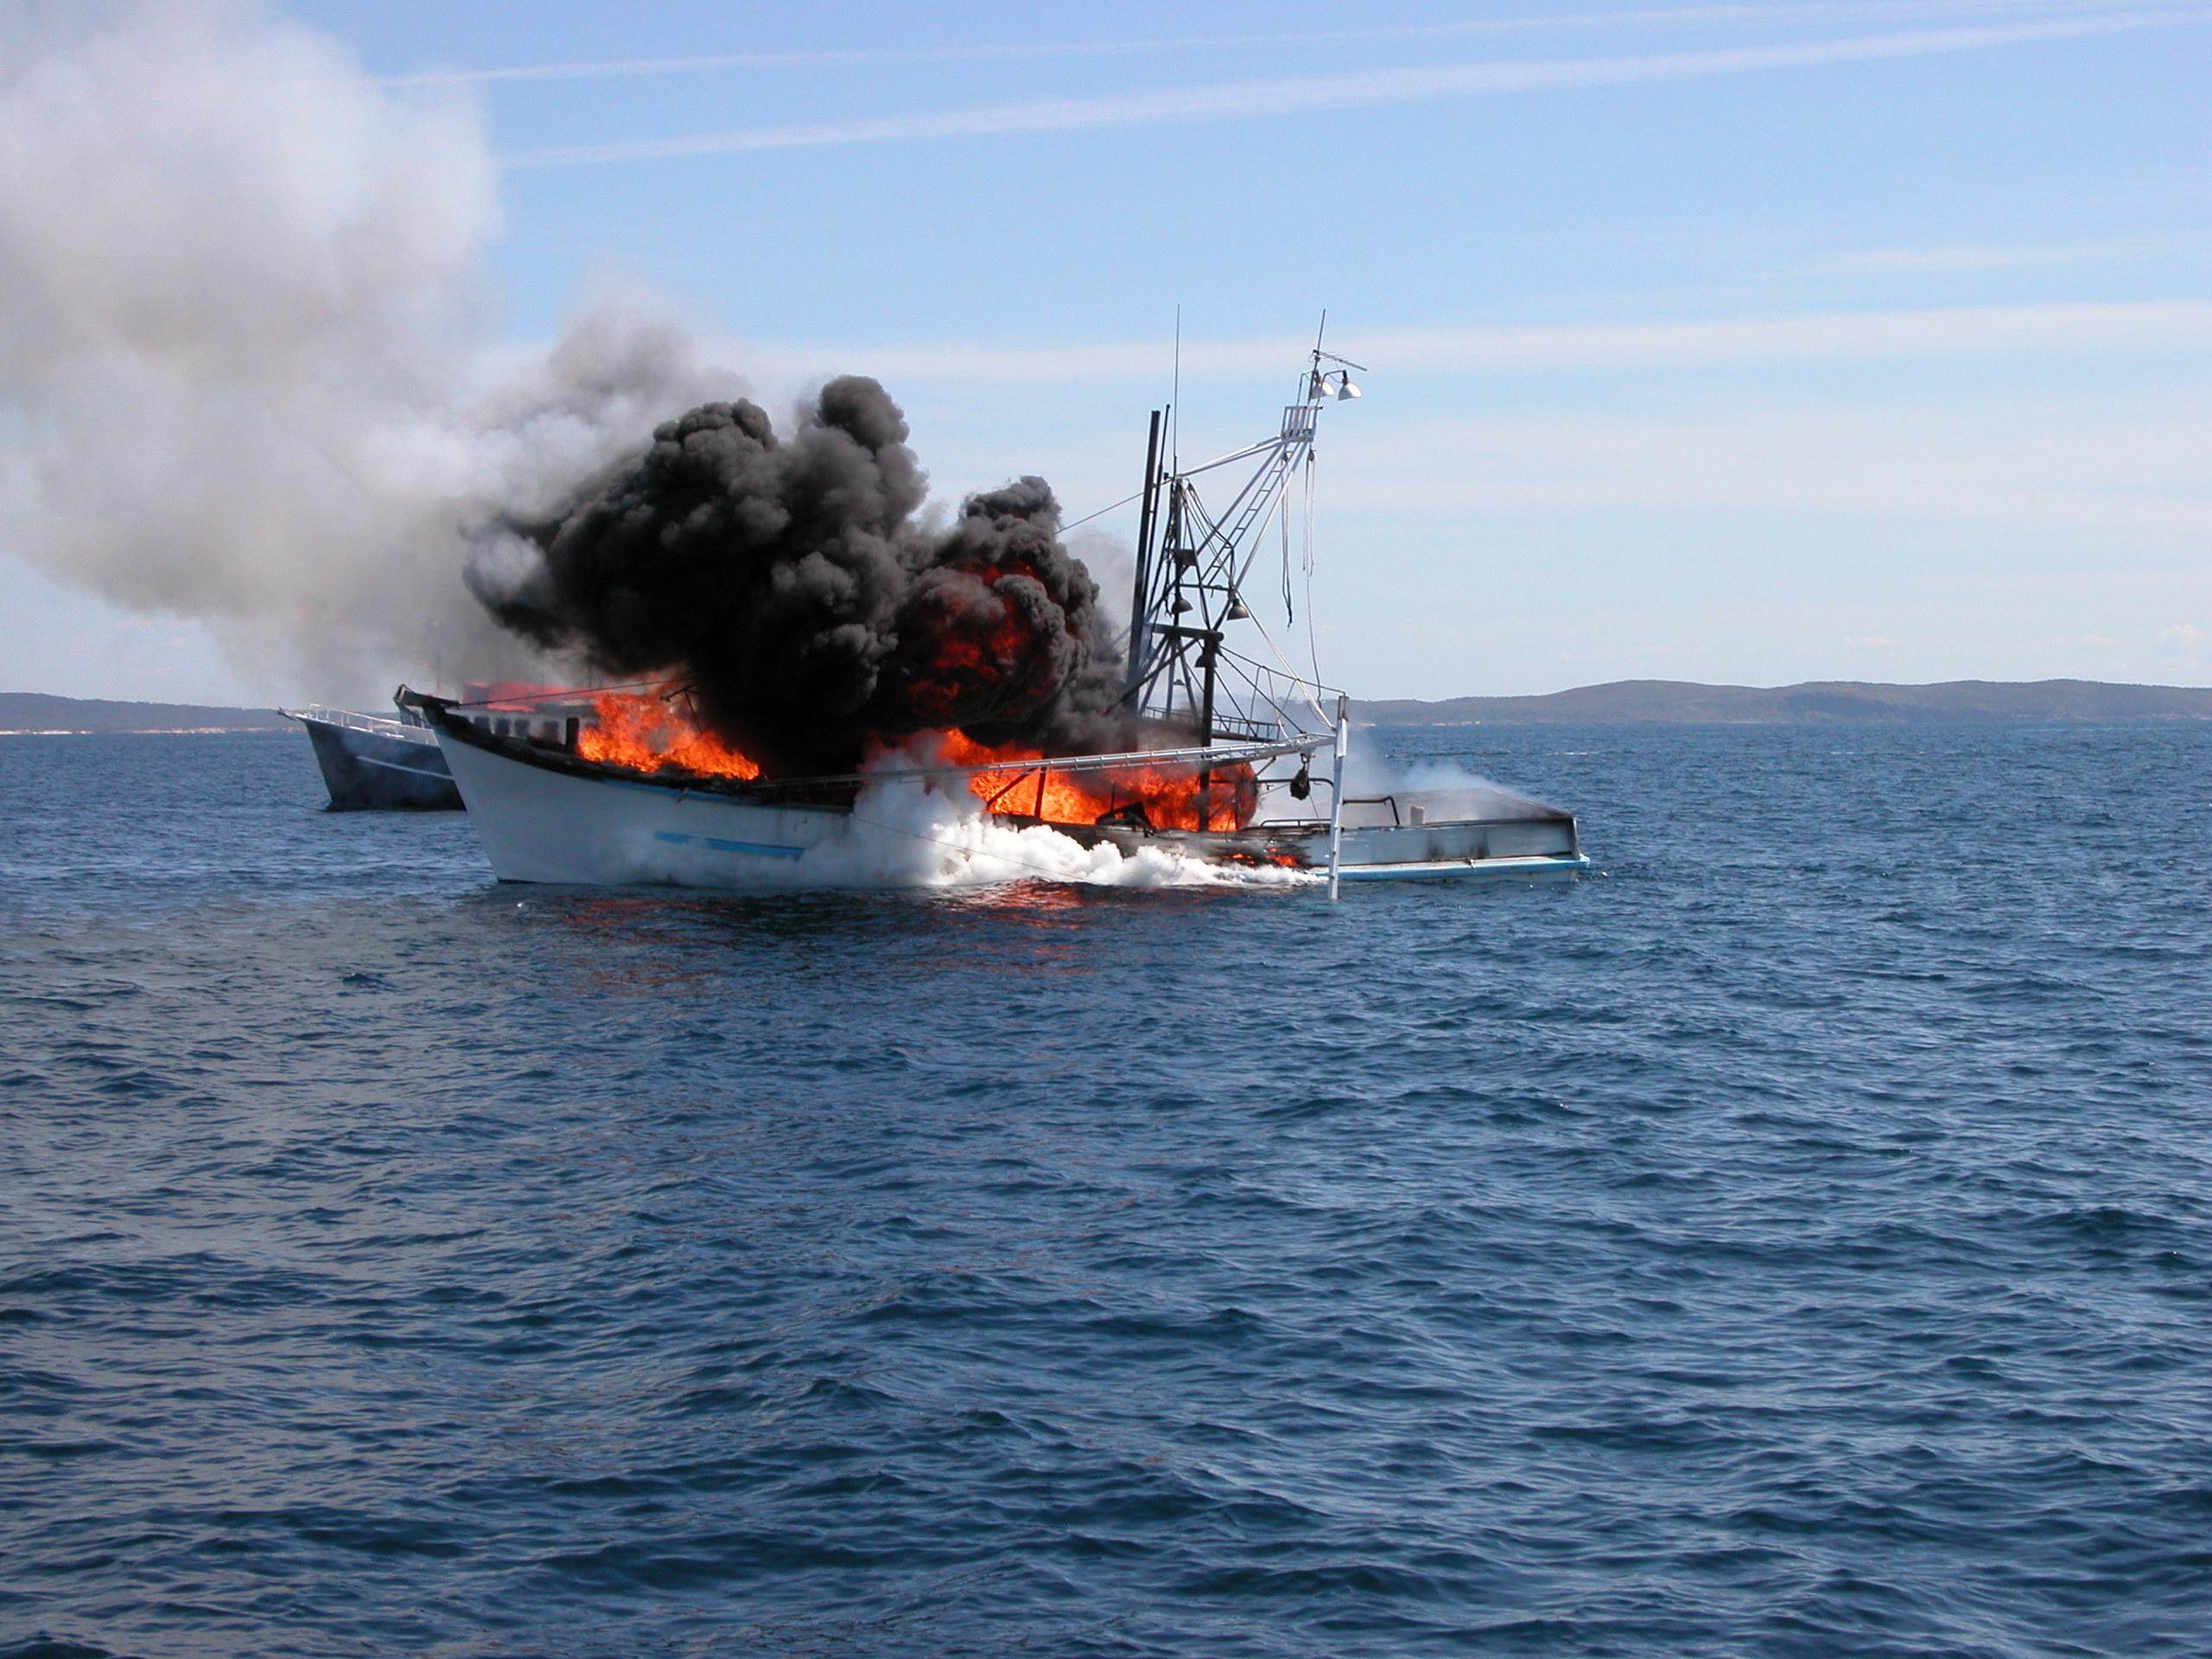 NEWS — Baptism of fire for new boat